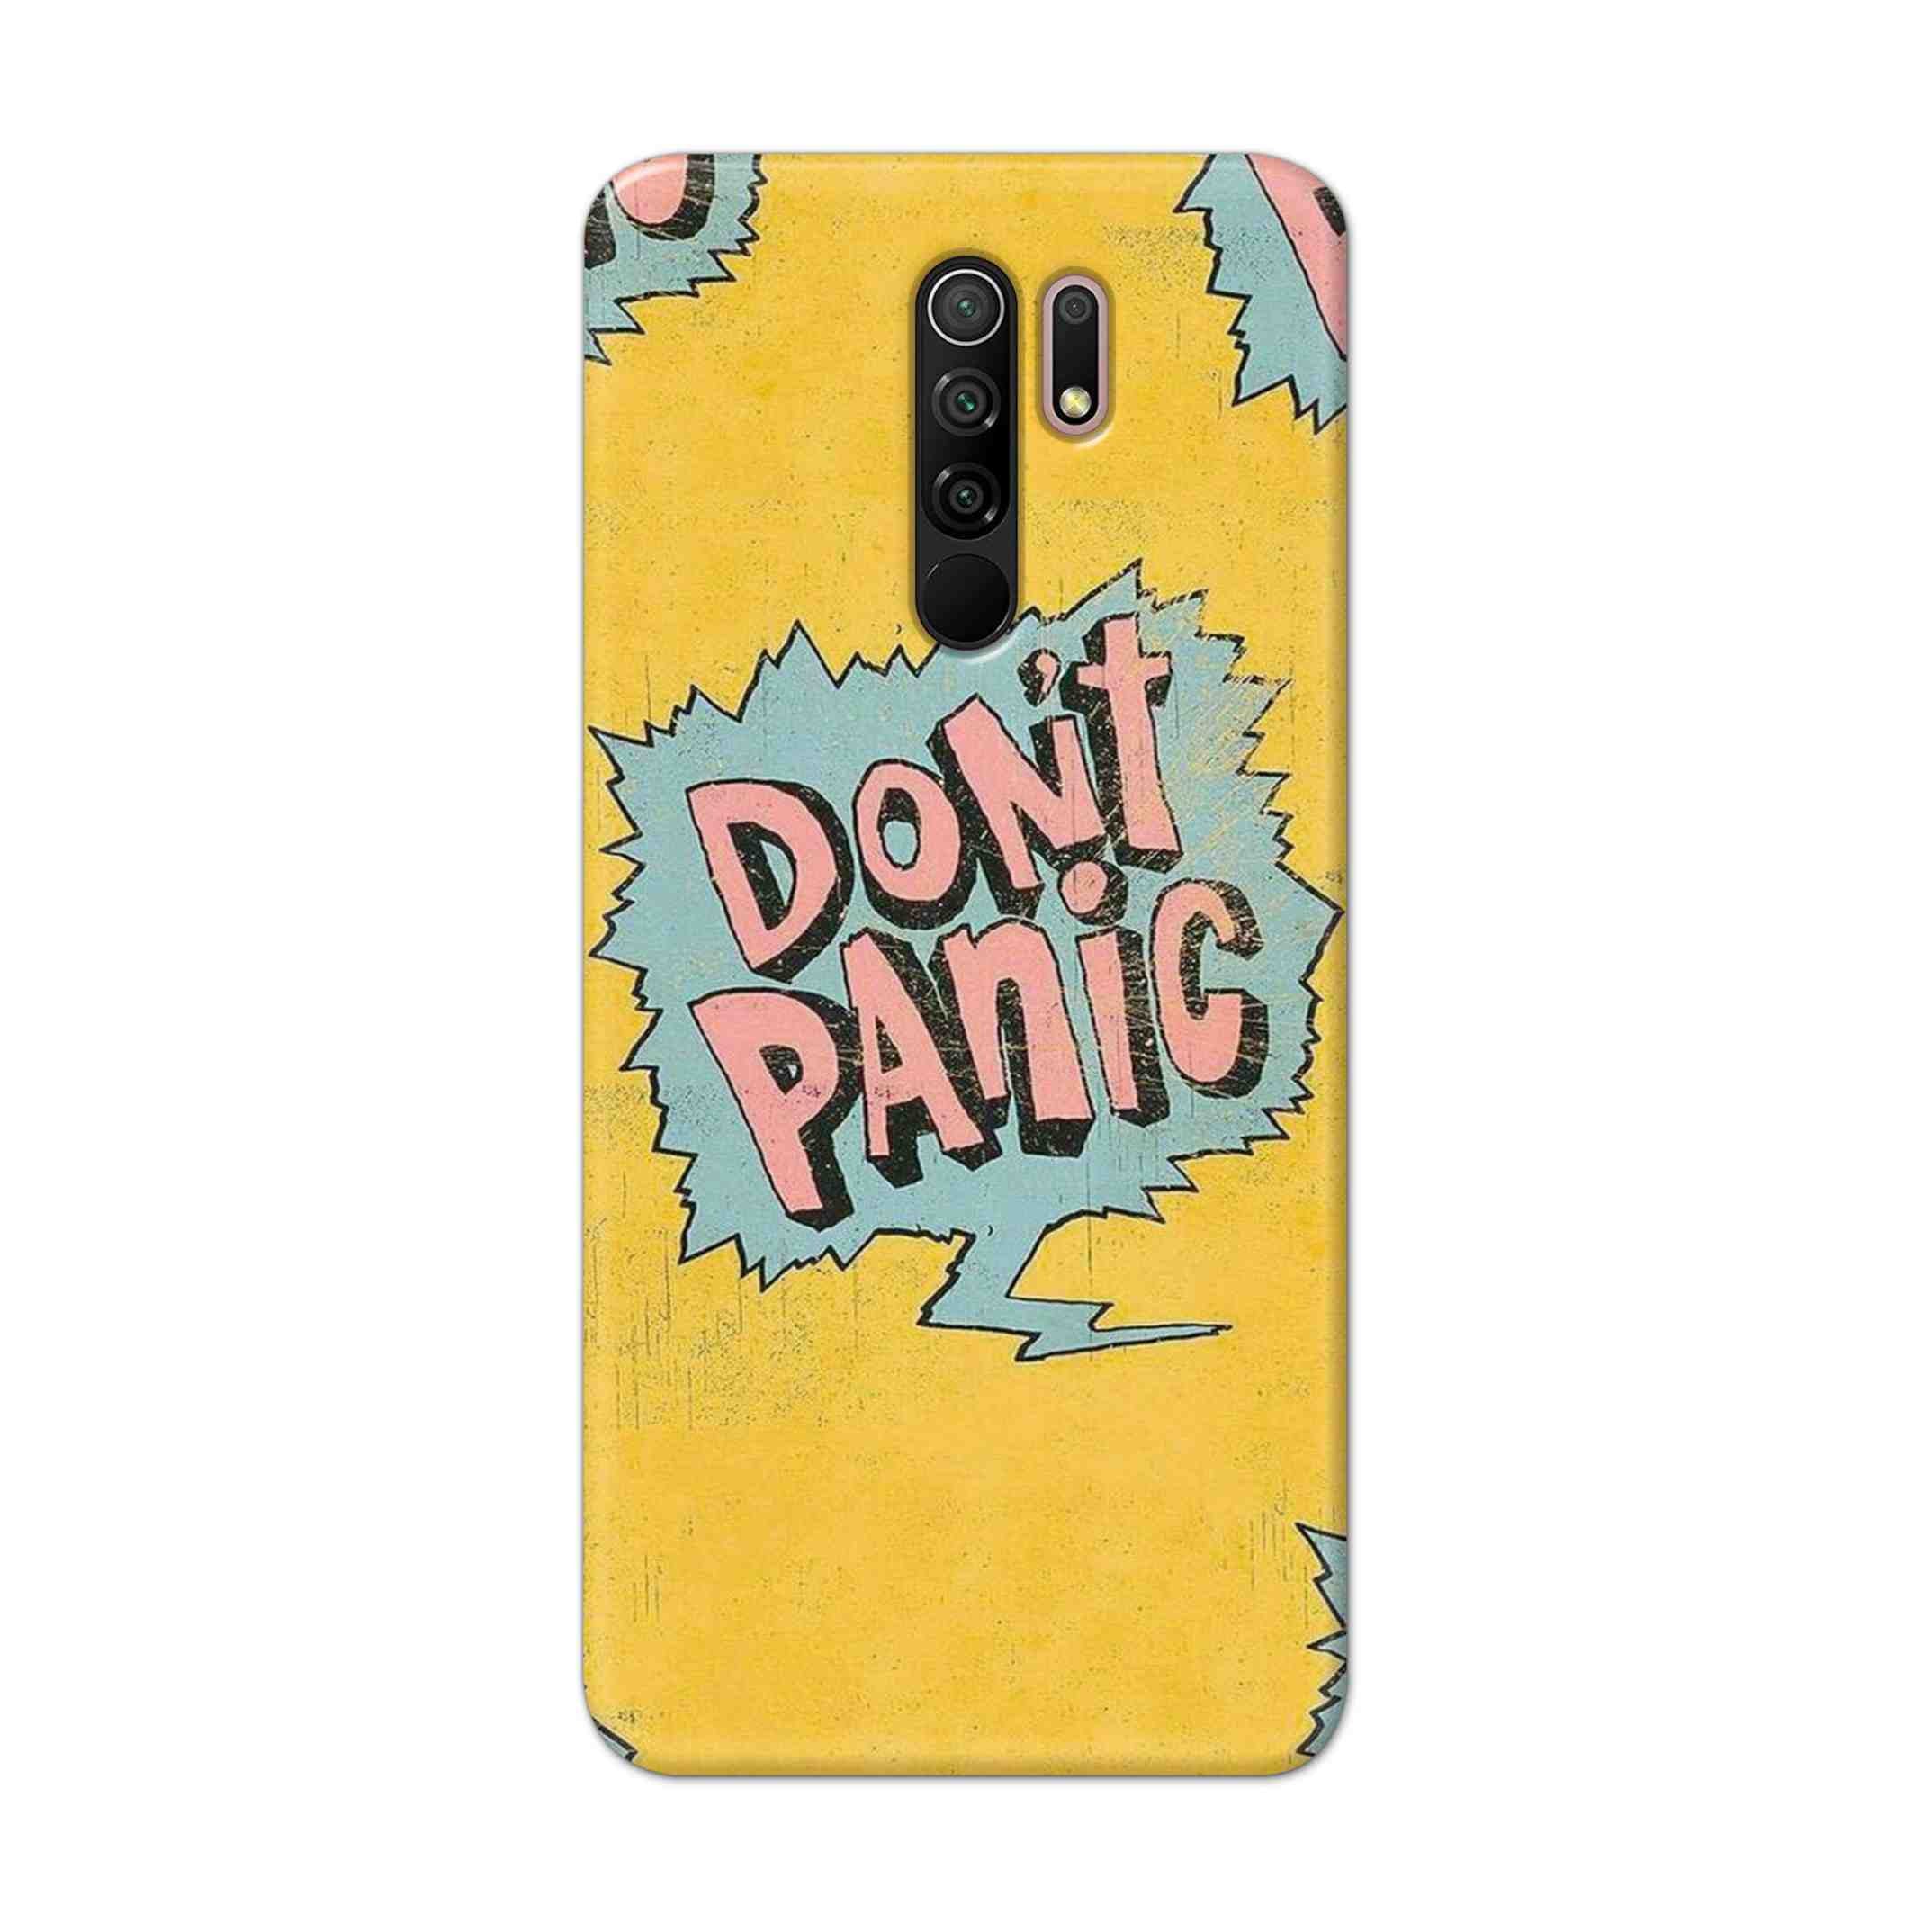 Buy Do Not Panic Hard Back Mobile Phone Case Cover For Xiaomi Redmi 9 Prime Online